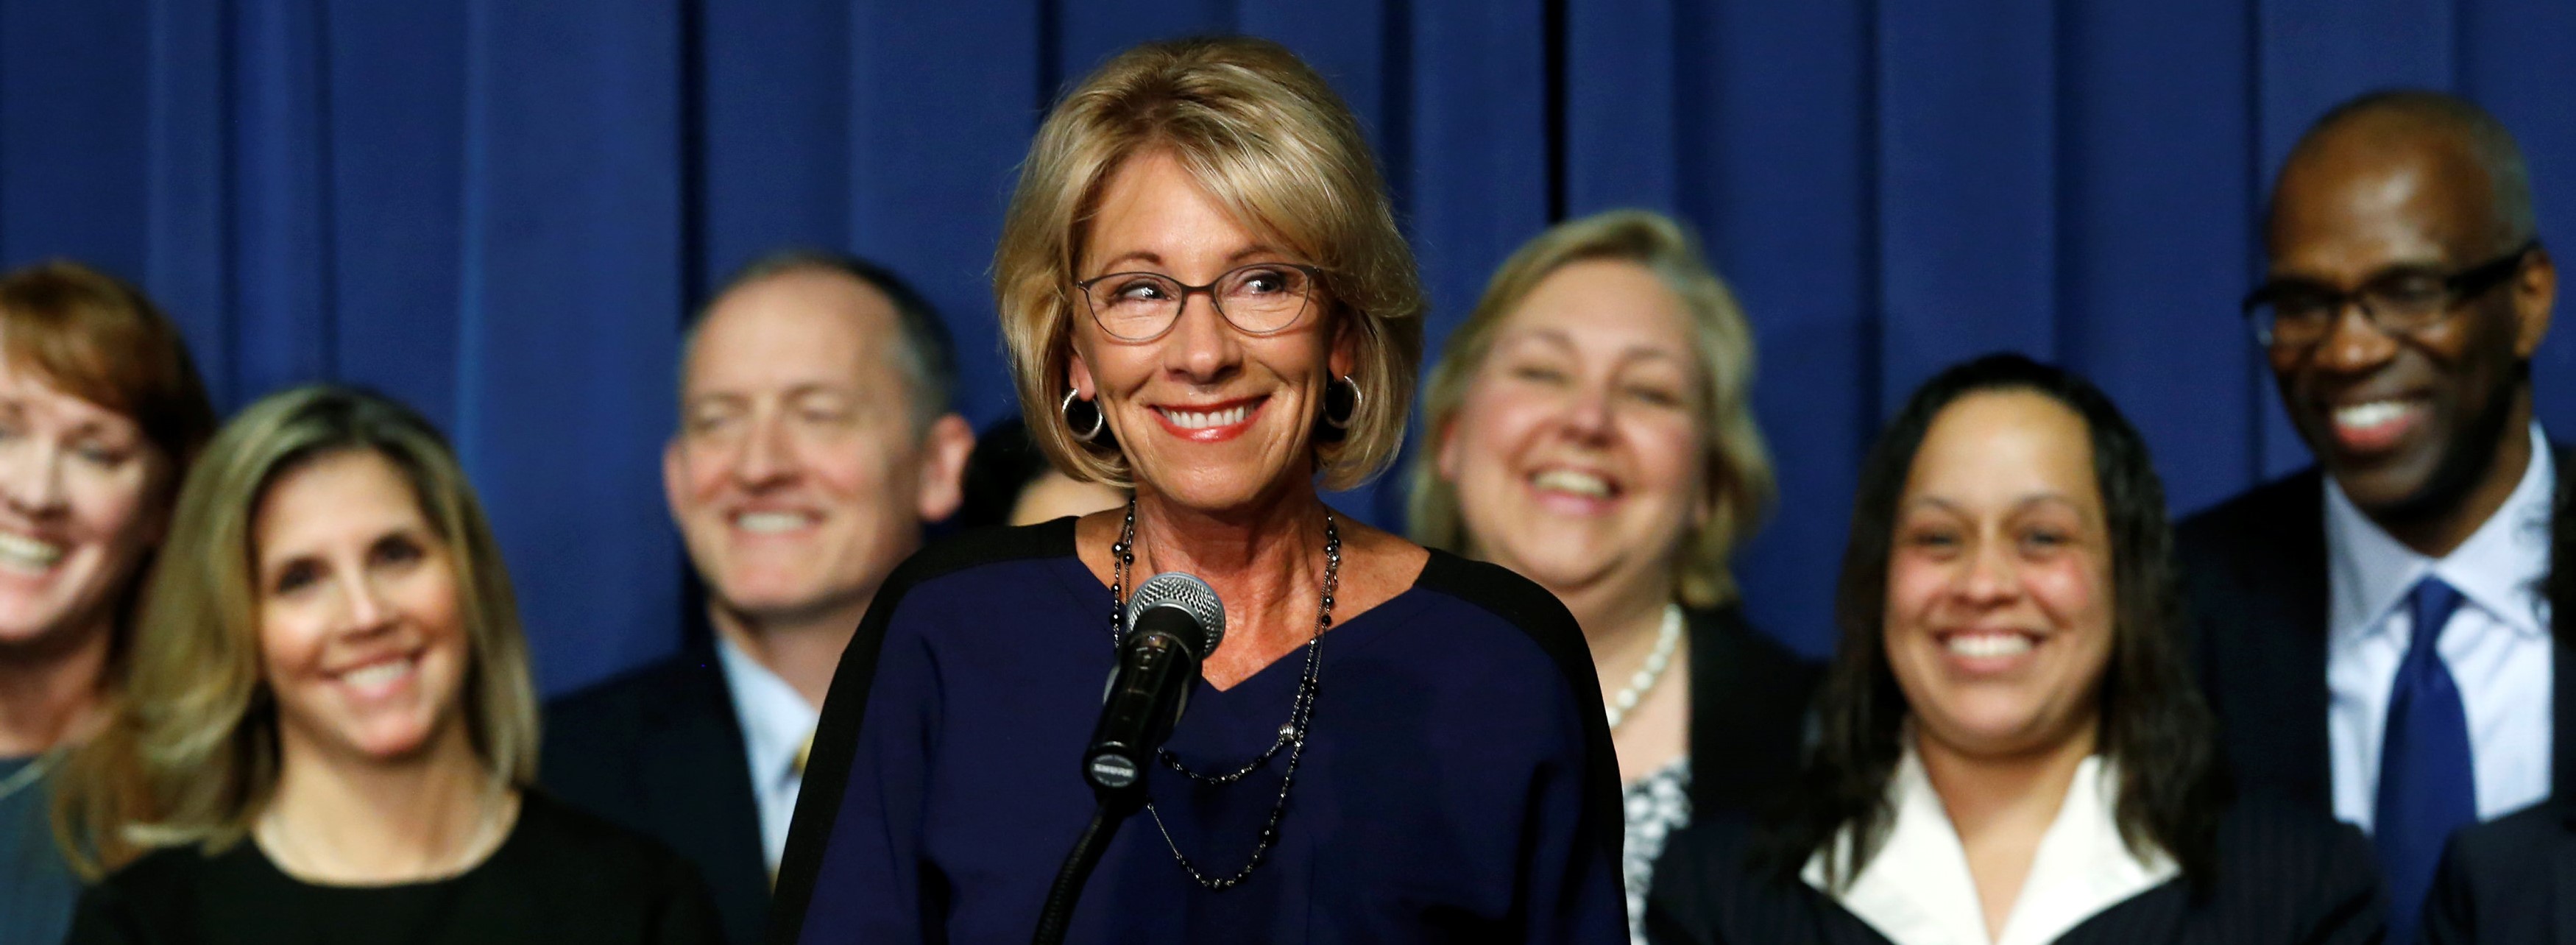 In Tweets: Students react to new U.S. Education Secretary appointment